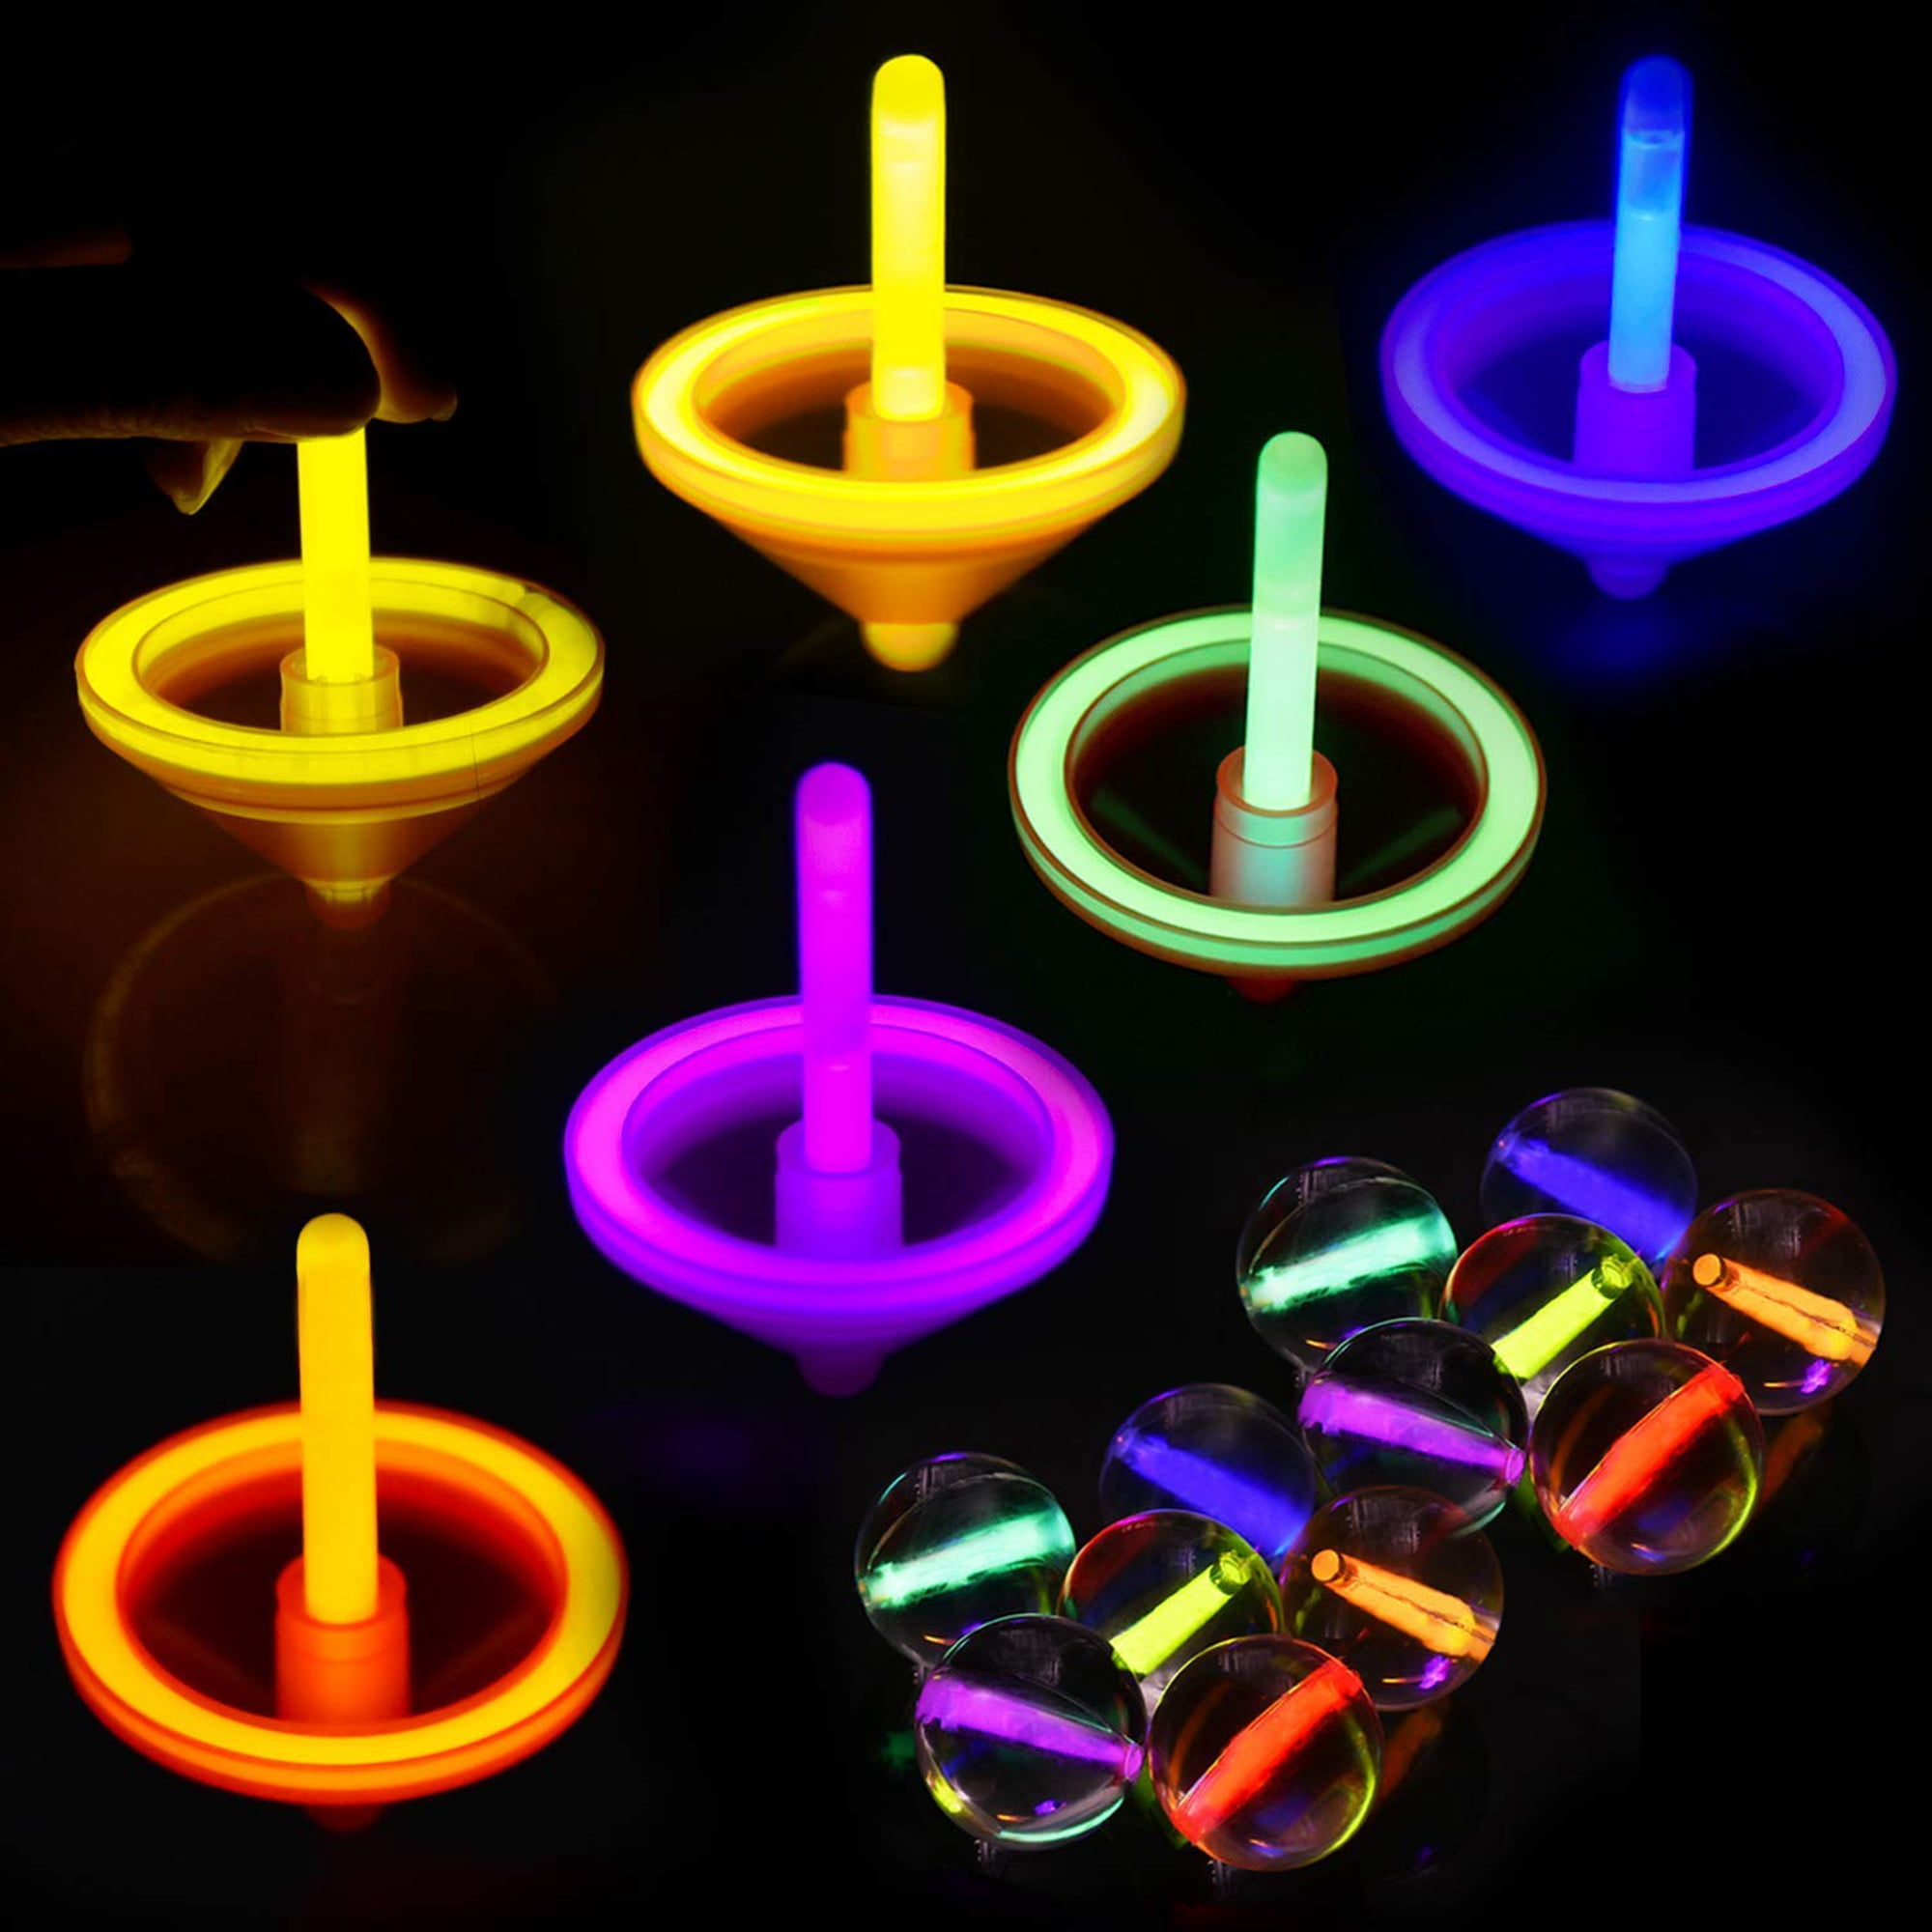 RAVE PARTY BAGS 6 x LED FLASHING SPIKE BALL PENDANTS UV PARTY FLASH NECKLACE 